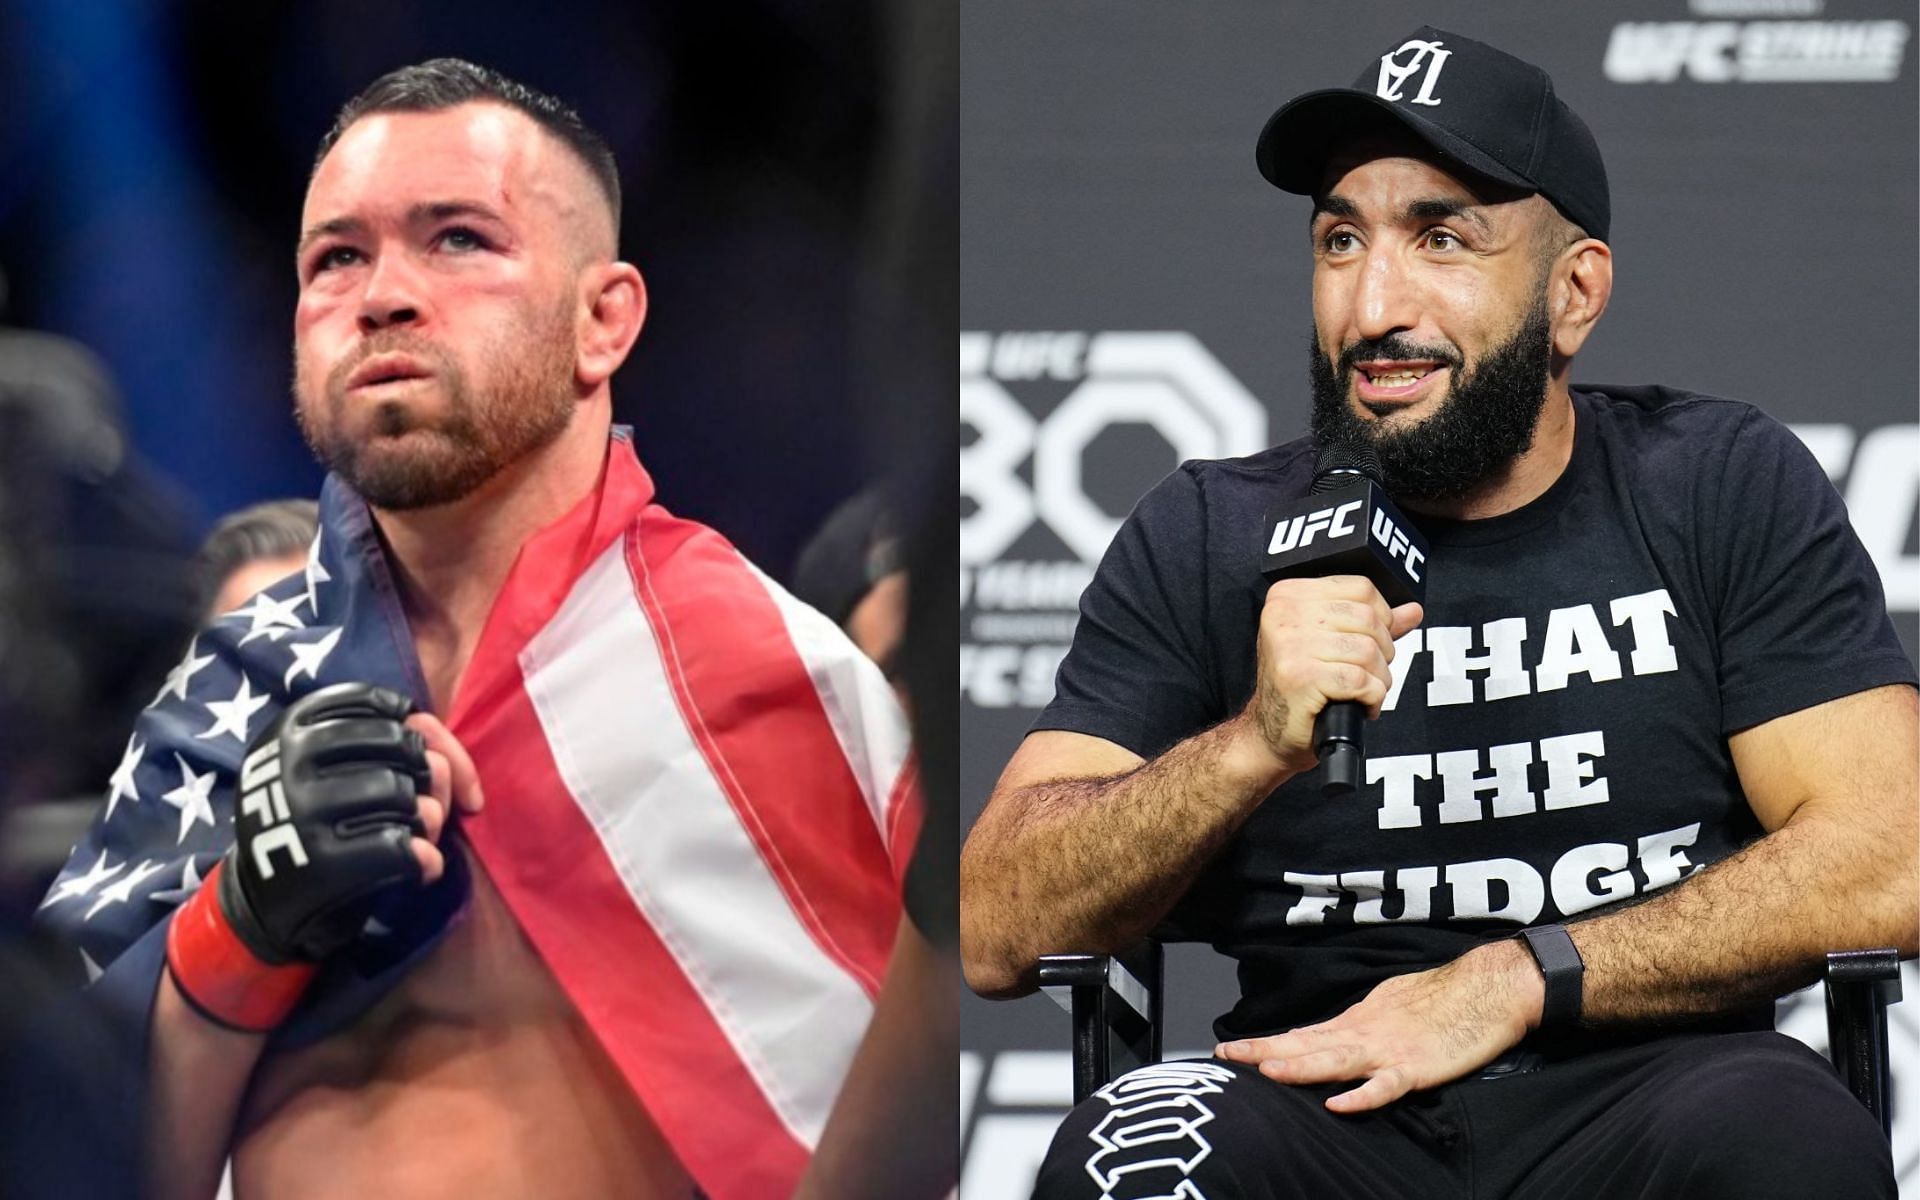 Colby Covington (left) and Belal Muhammad (right). [via Getty Images]